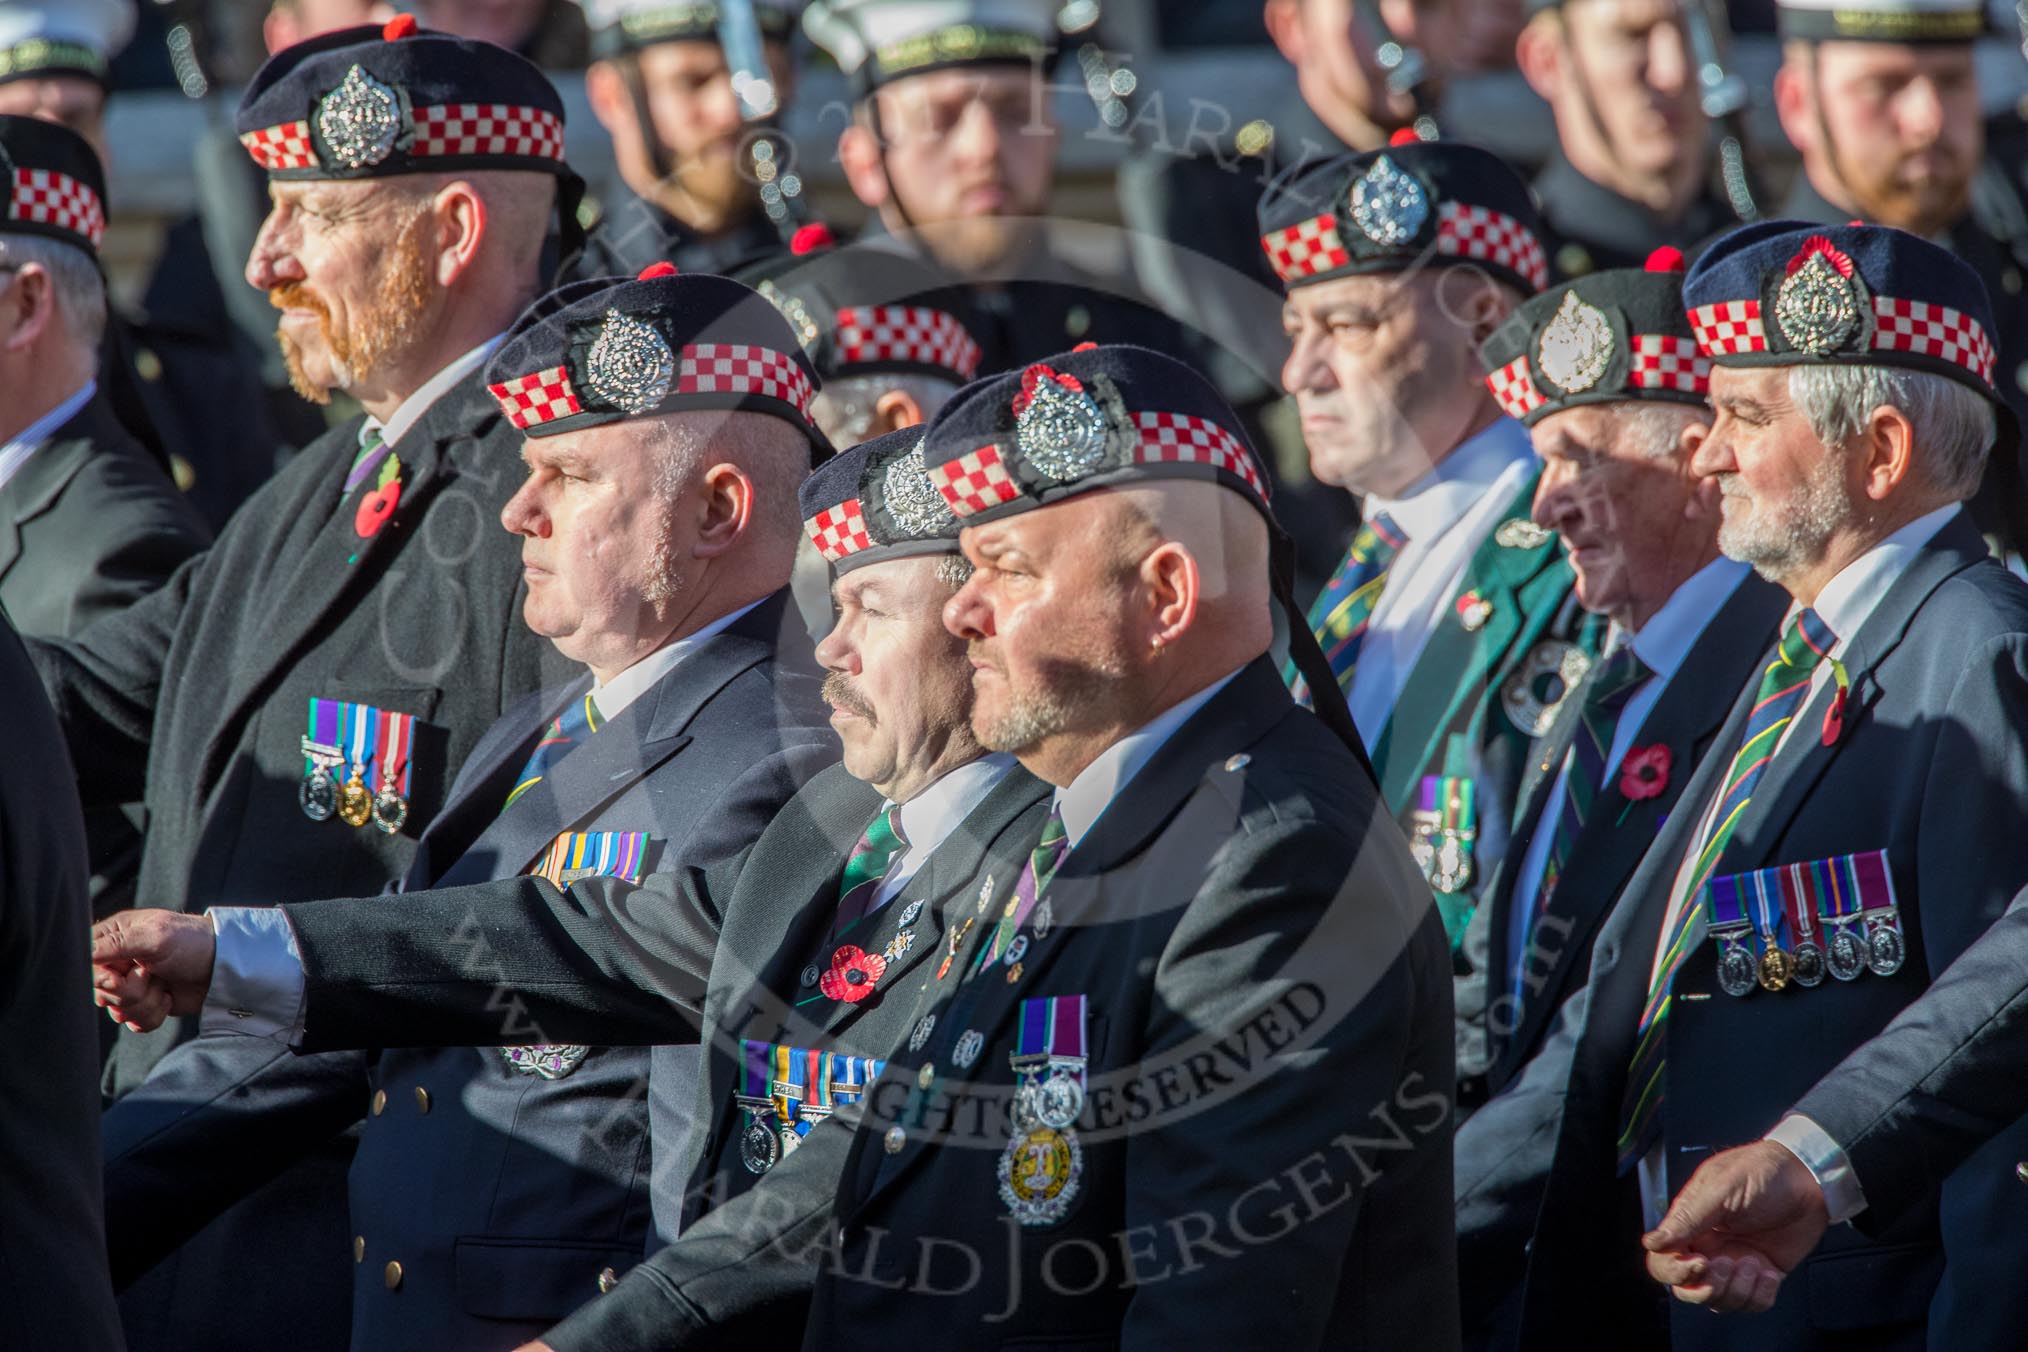 The Regimental Association of the Argyll and Sutherland High (Group A13, 50 members) during the Royal British Legion March Past on Remembrance Sunday at the Cenotaph, Whitehall, Westminster, London, 11 November 2018, 11:58.